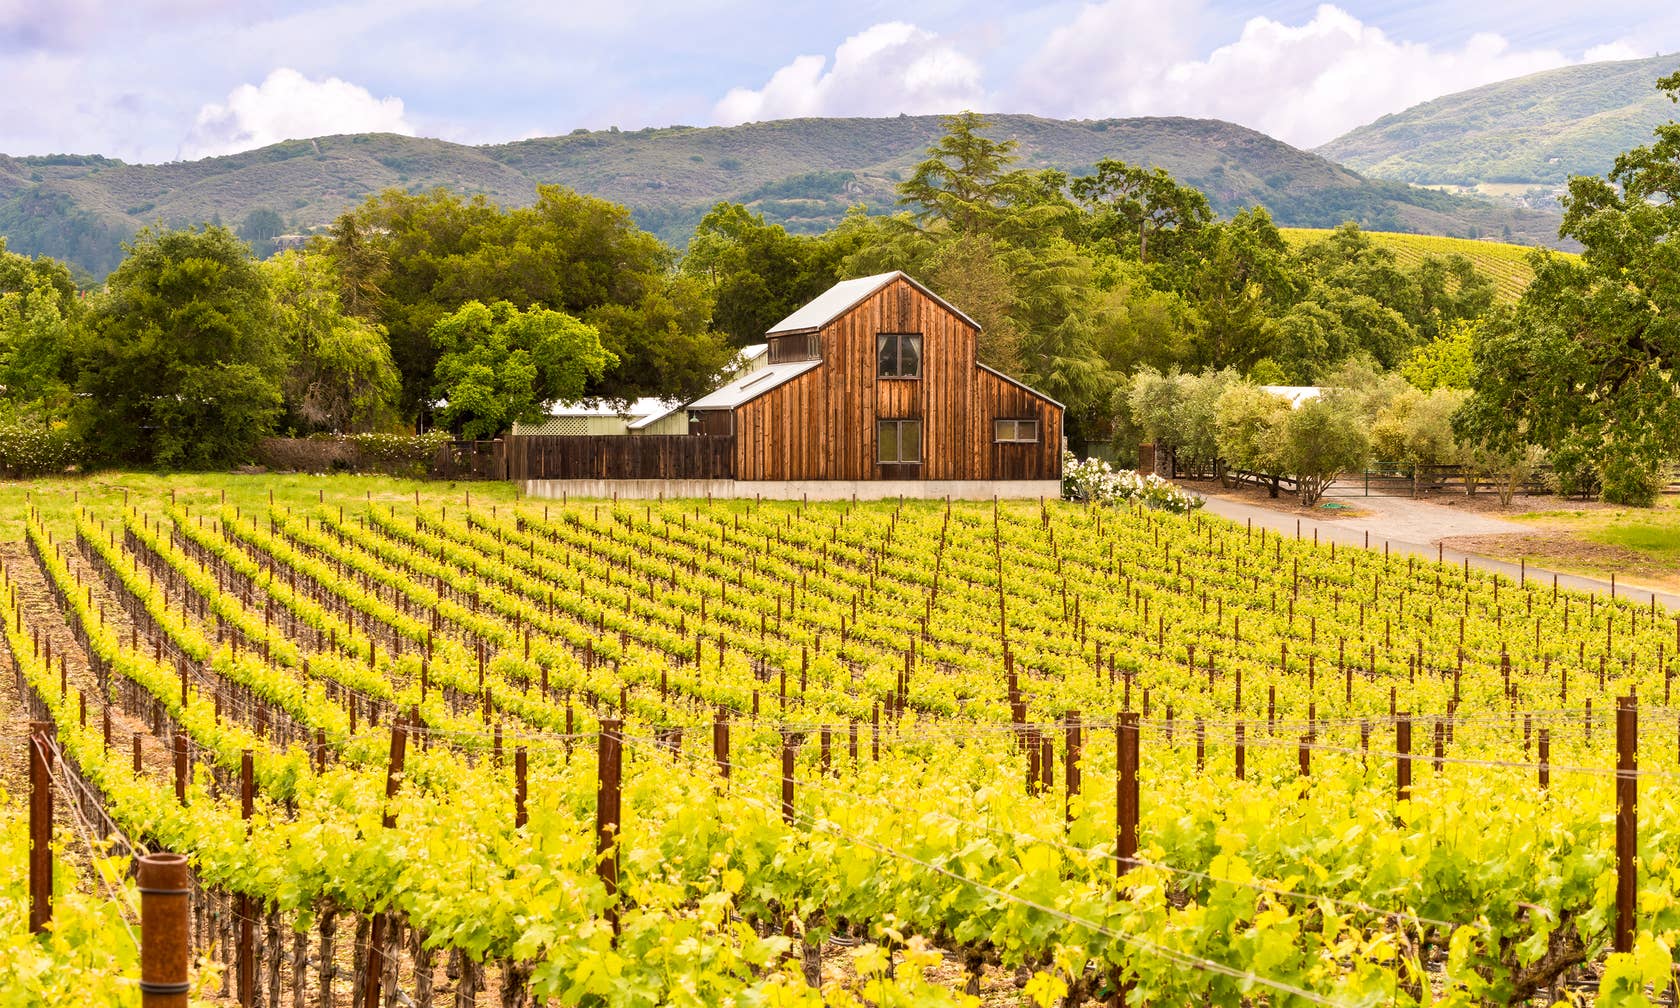 Holiday rentals in Sonoma